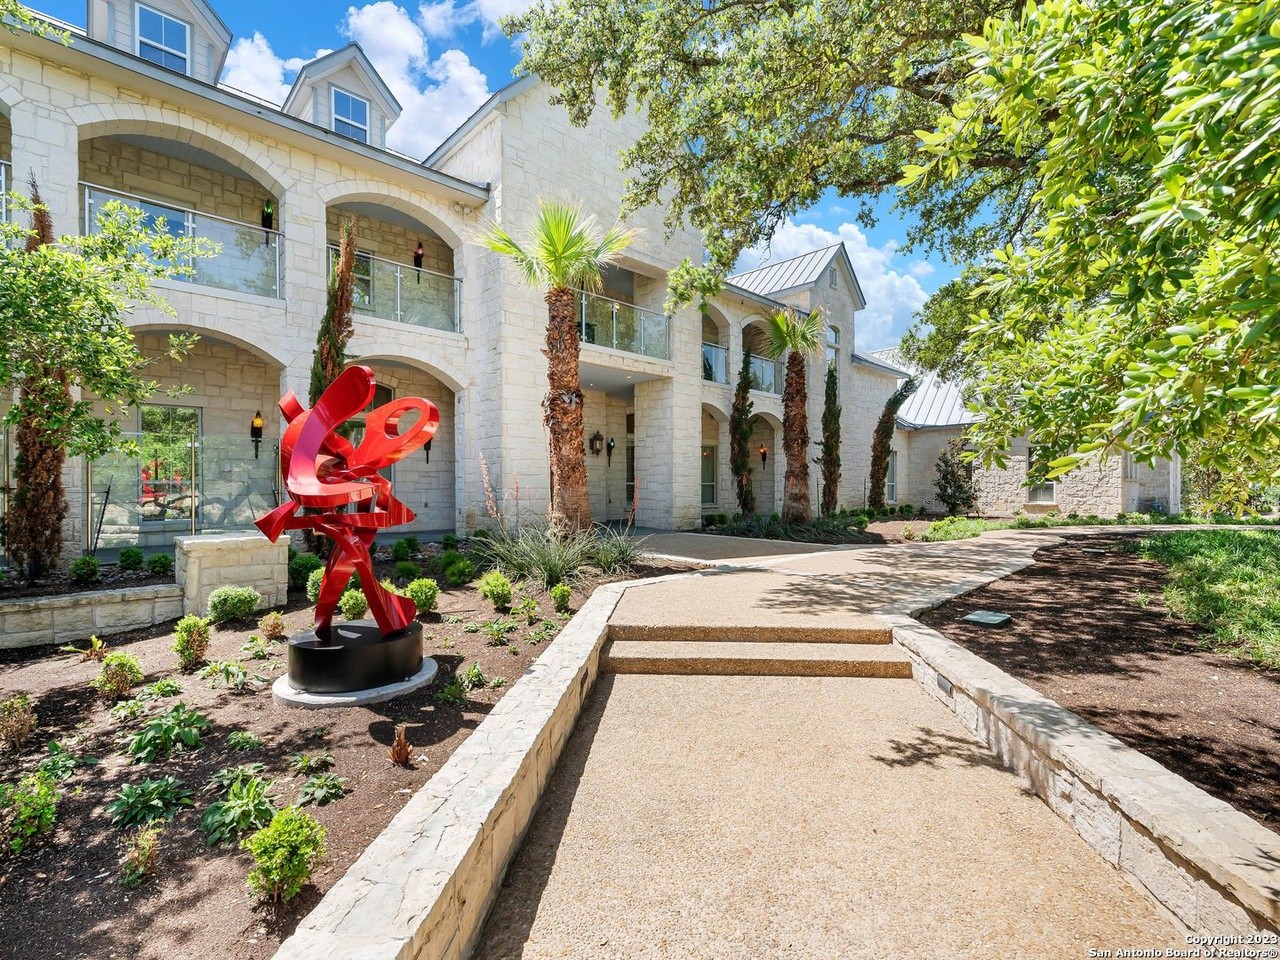 Spurs Coach Gregg Popovich's former San Antonio home is back on the market for $5.5 million